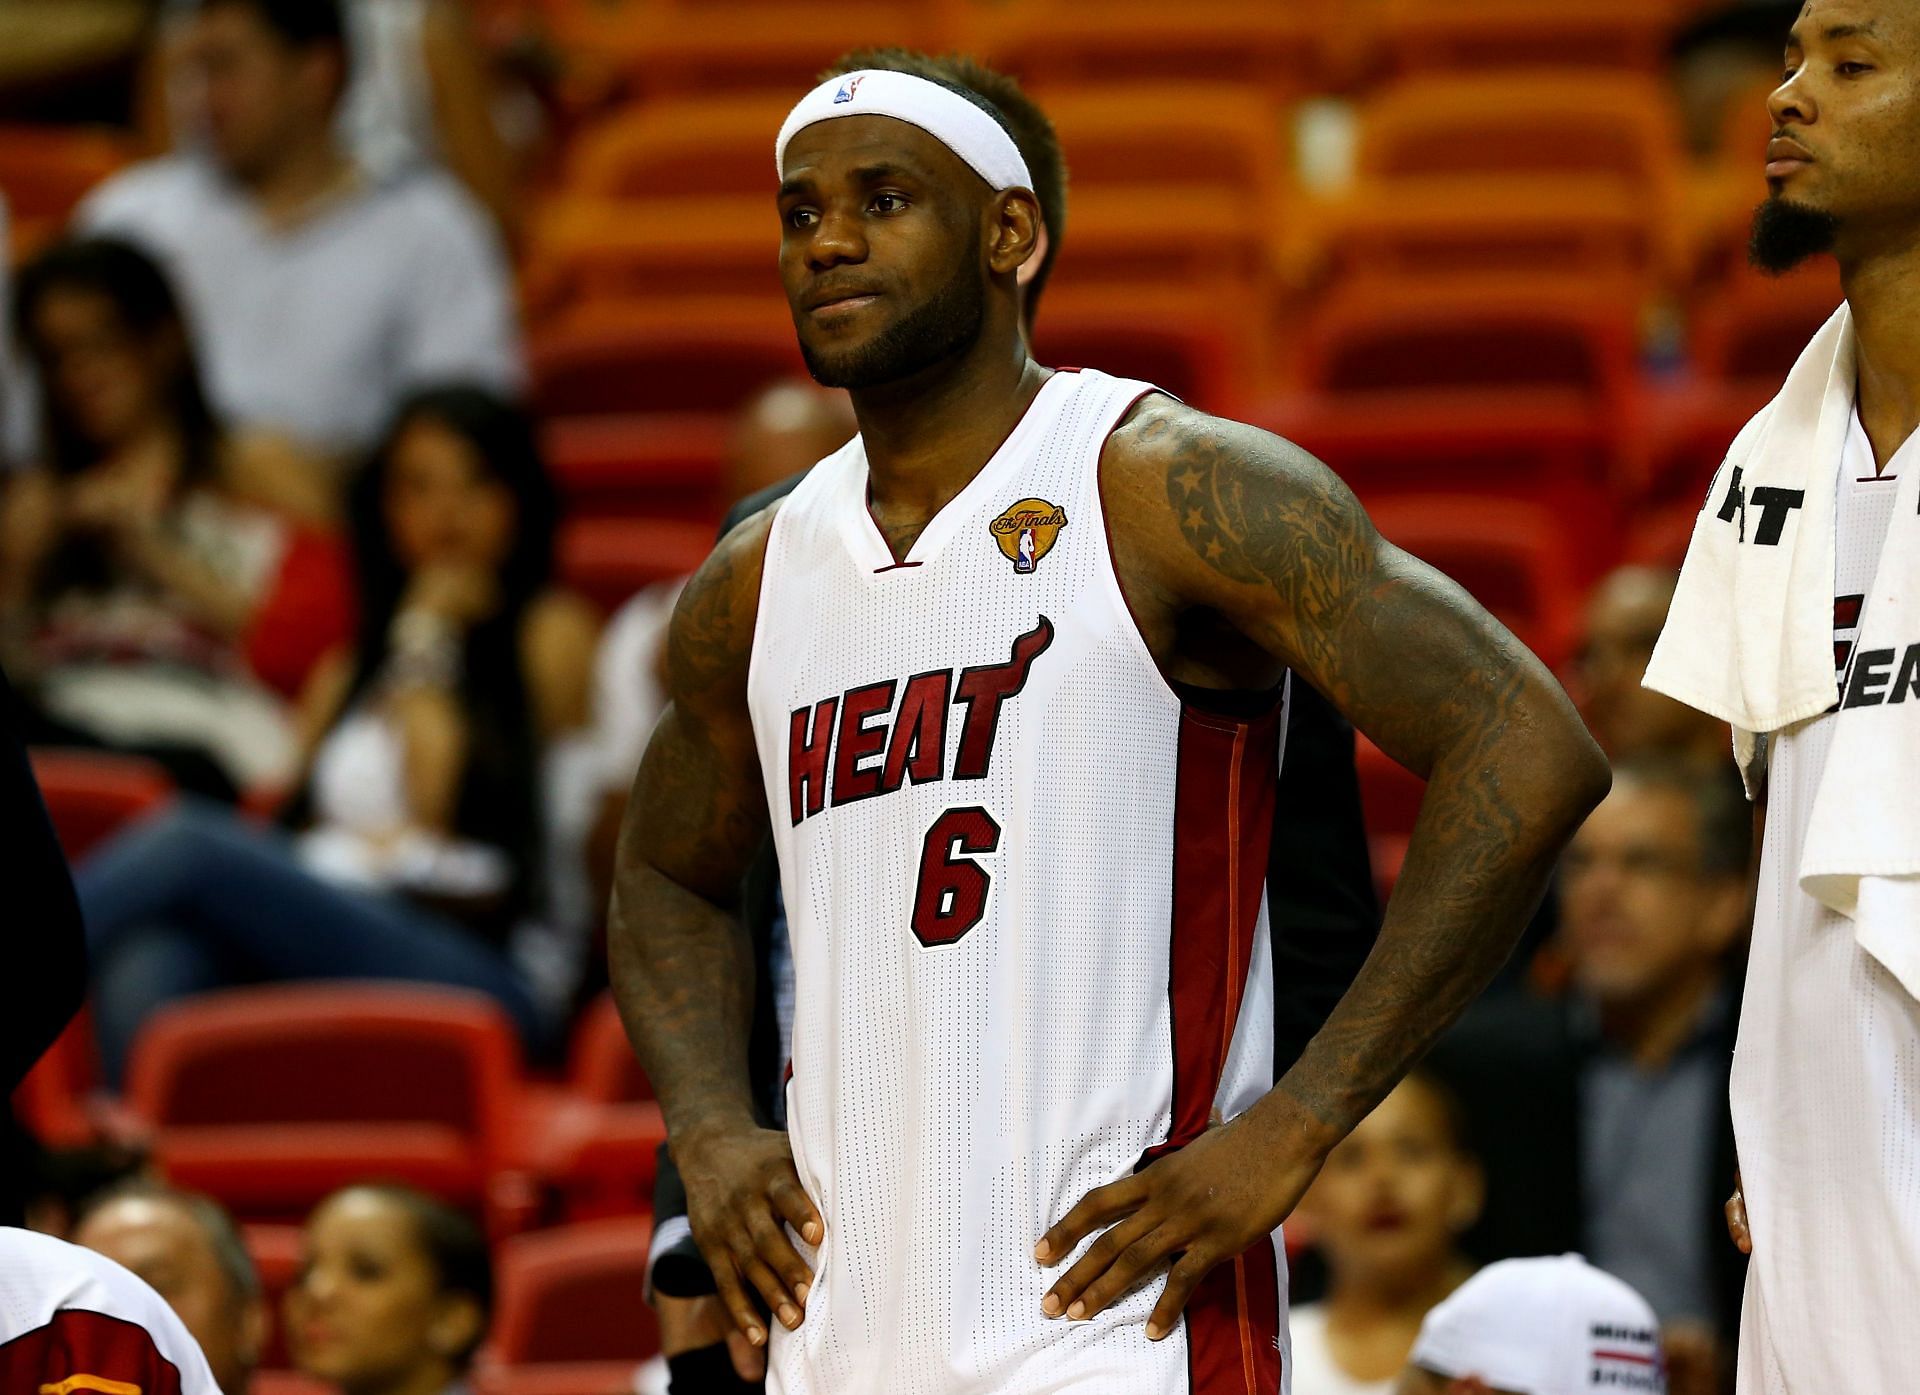 Lebron James on the Miami Heat in the 2014 NBA Finals